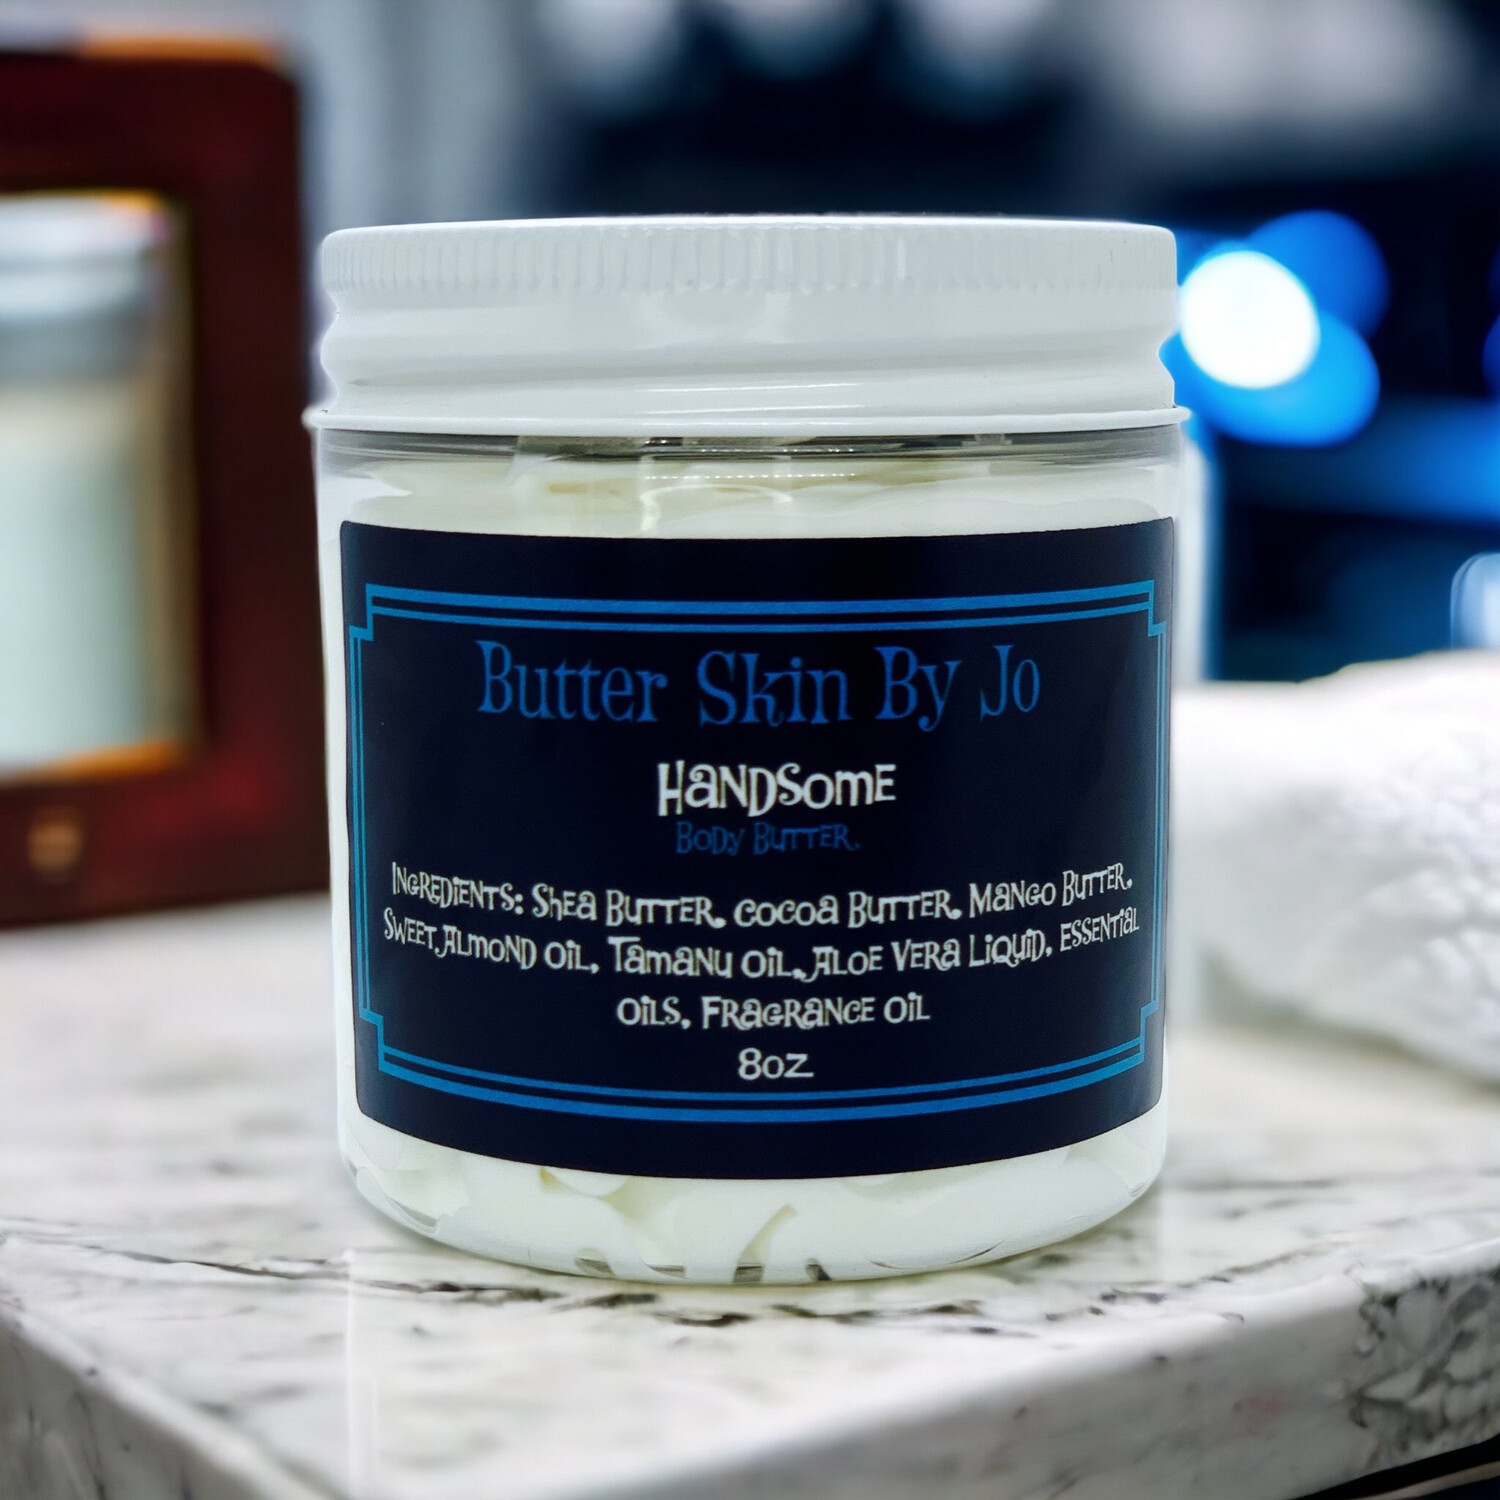 Handsome Body Butter Subscription